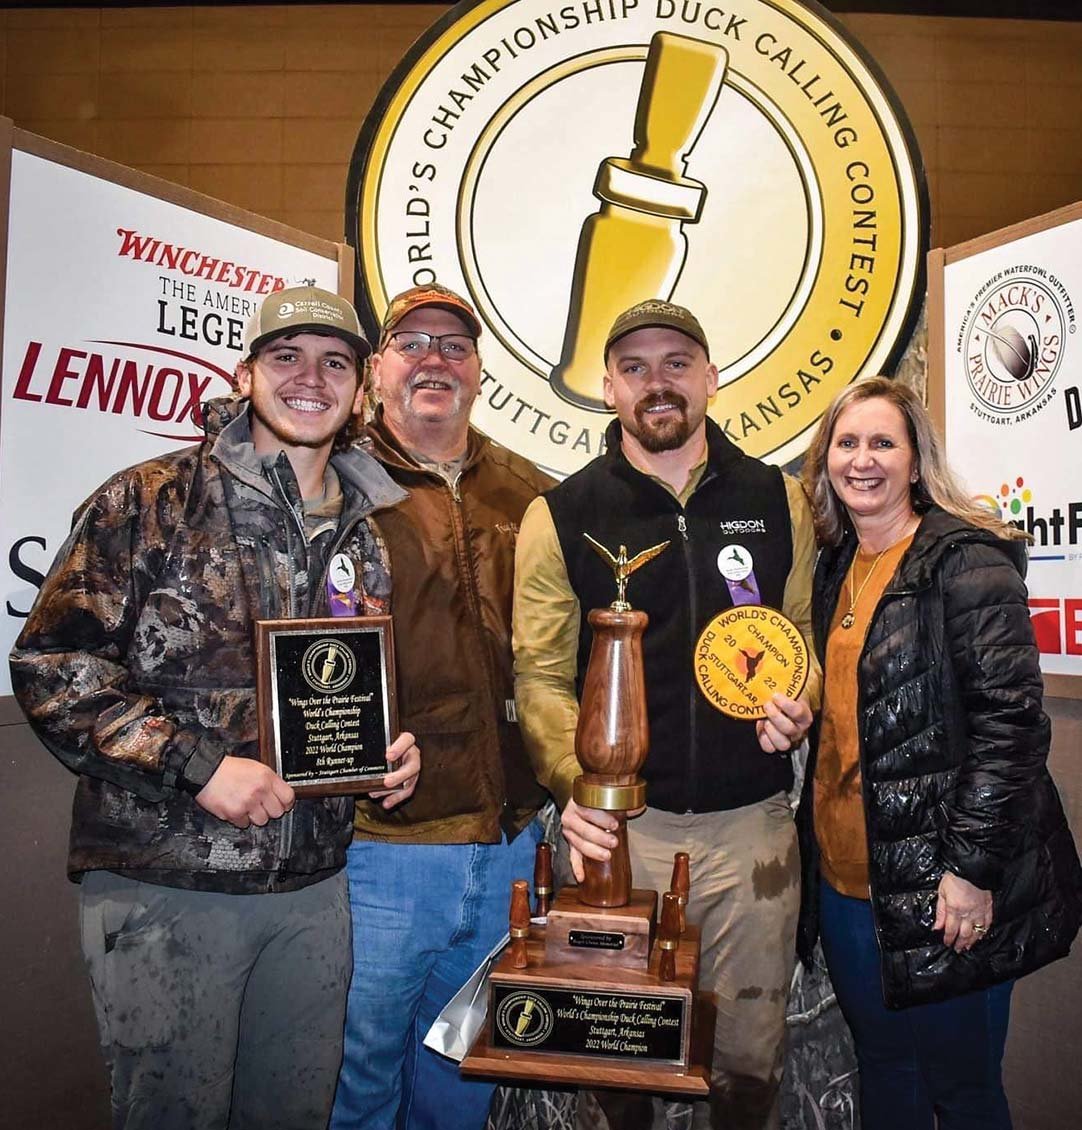 The Fields family of Huntingdon were present for the presentation of awards to their sons. (L to R) Blane Fields, Jason Fields, Seth Fields and Lisa.